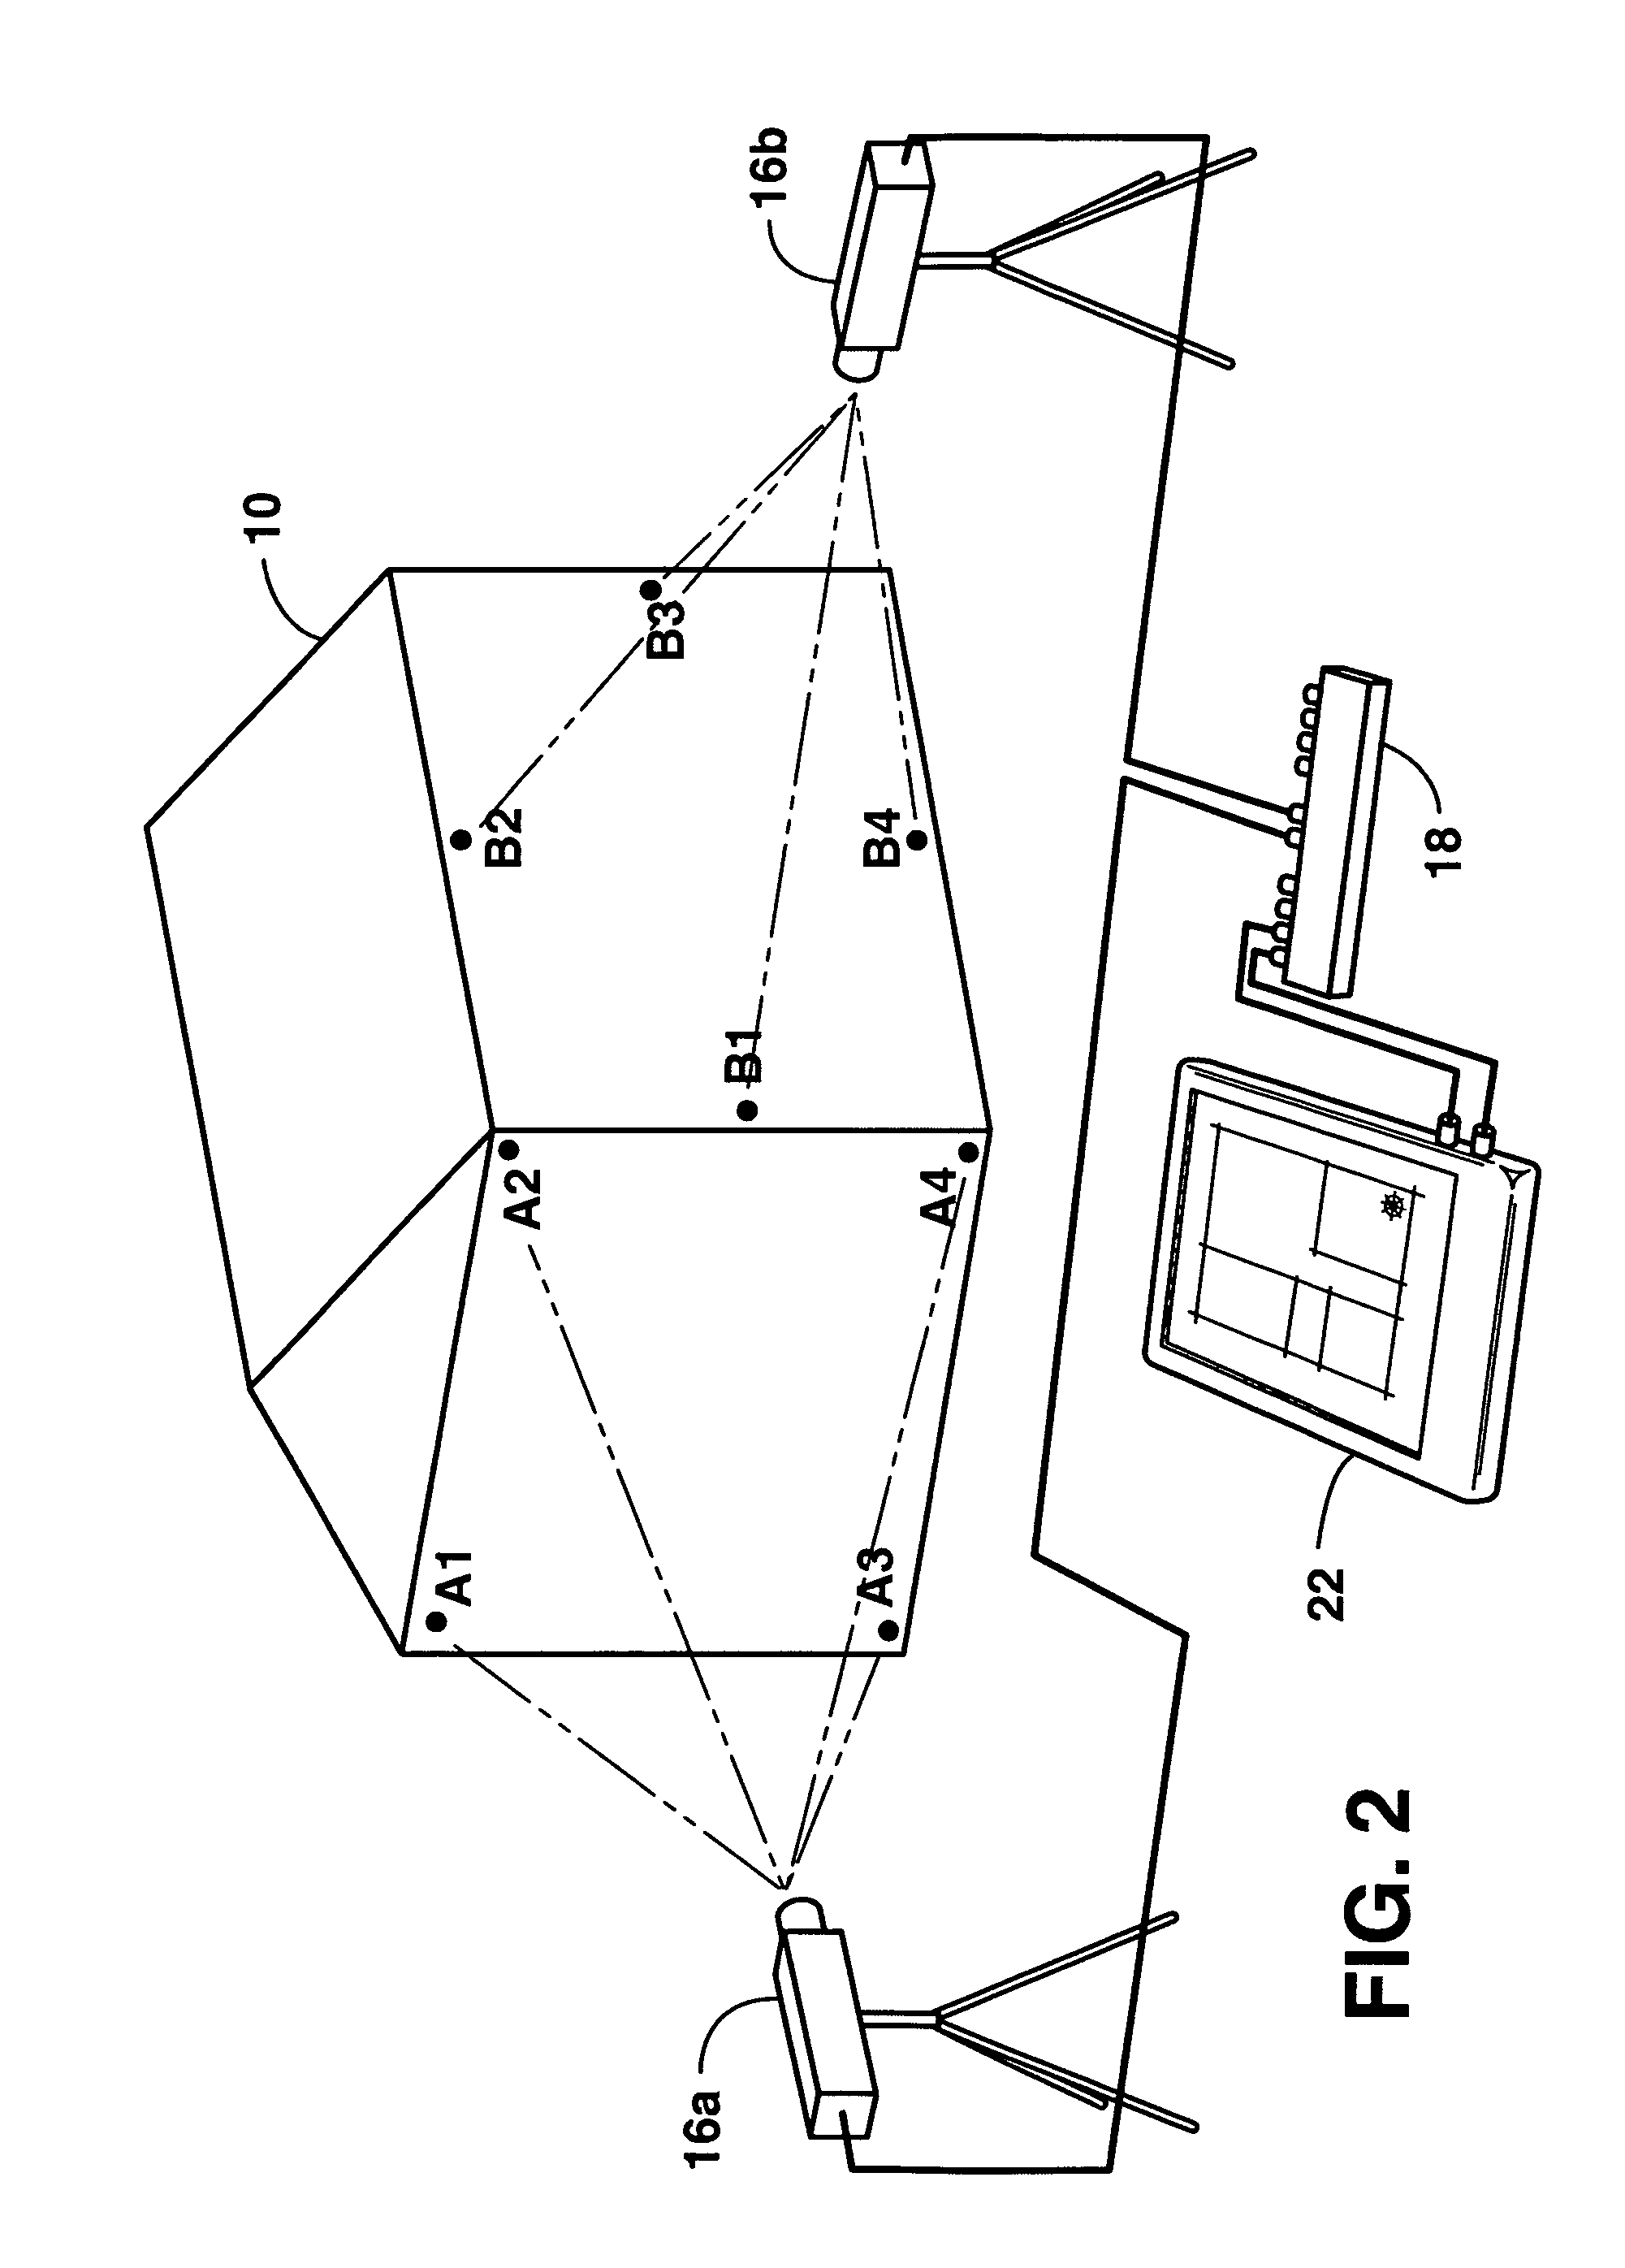 Human target acquisition system and method